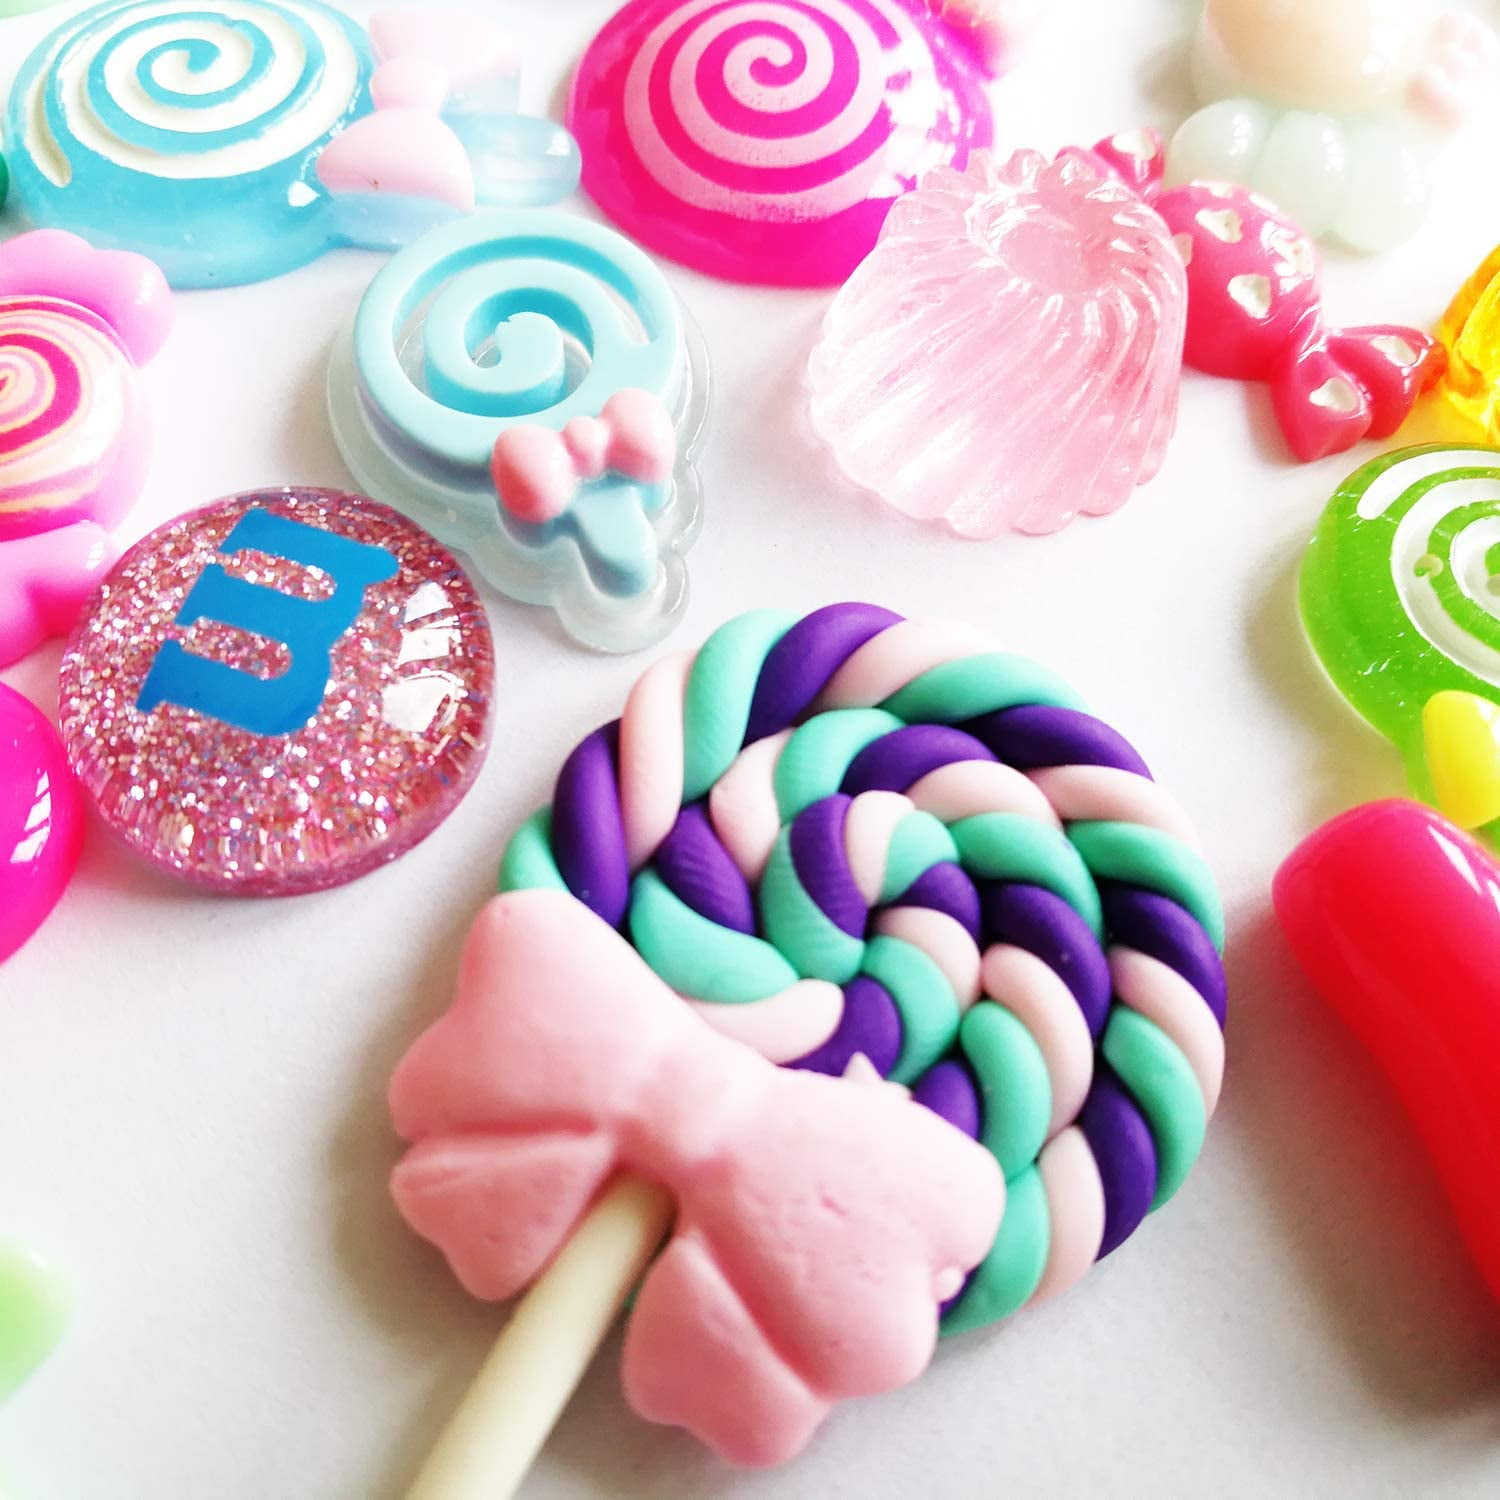 80Pcs Candy Charms Cute Decorative Eco-friendly DIY Craft Candy Resin  Charms Flatback Household Supplies